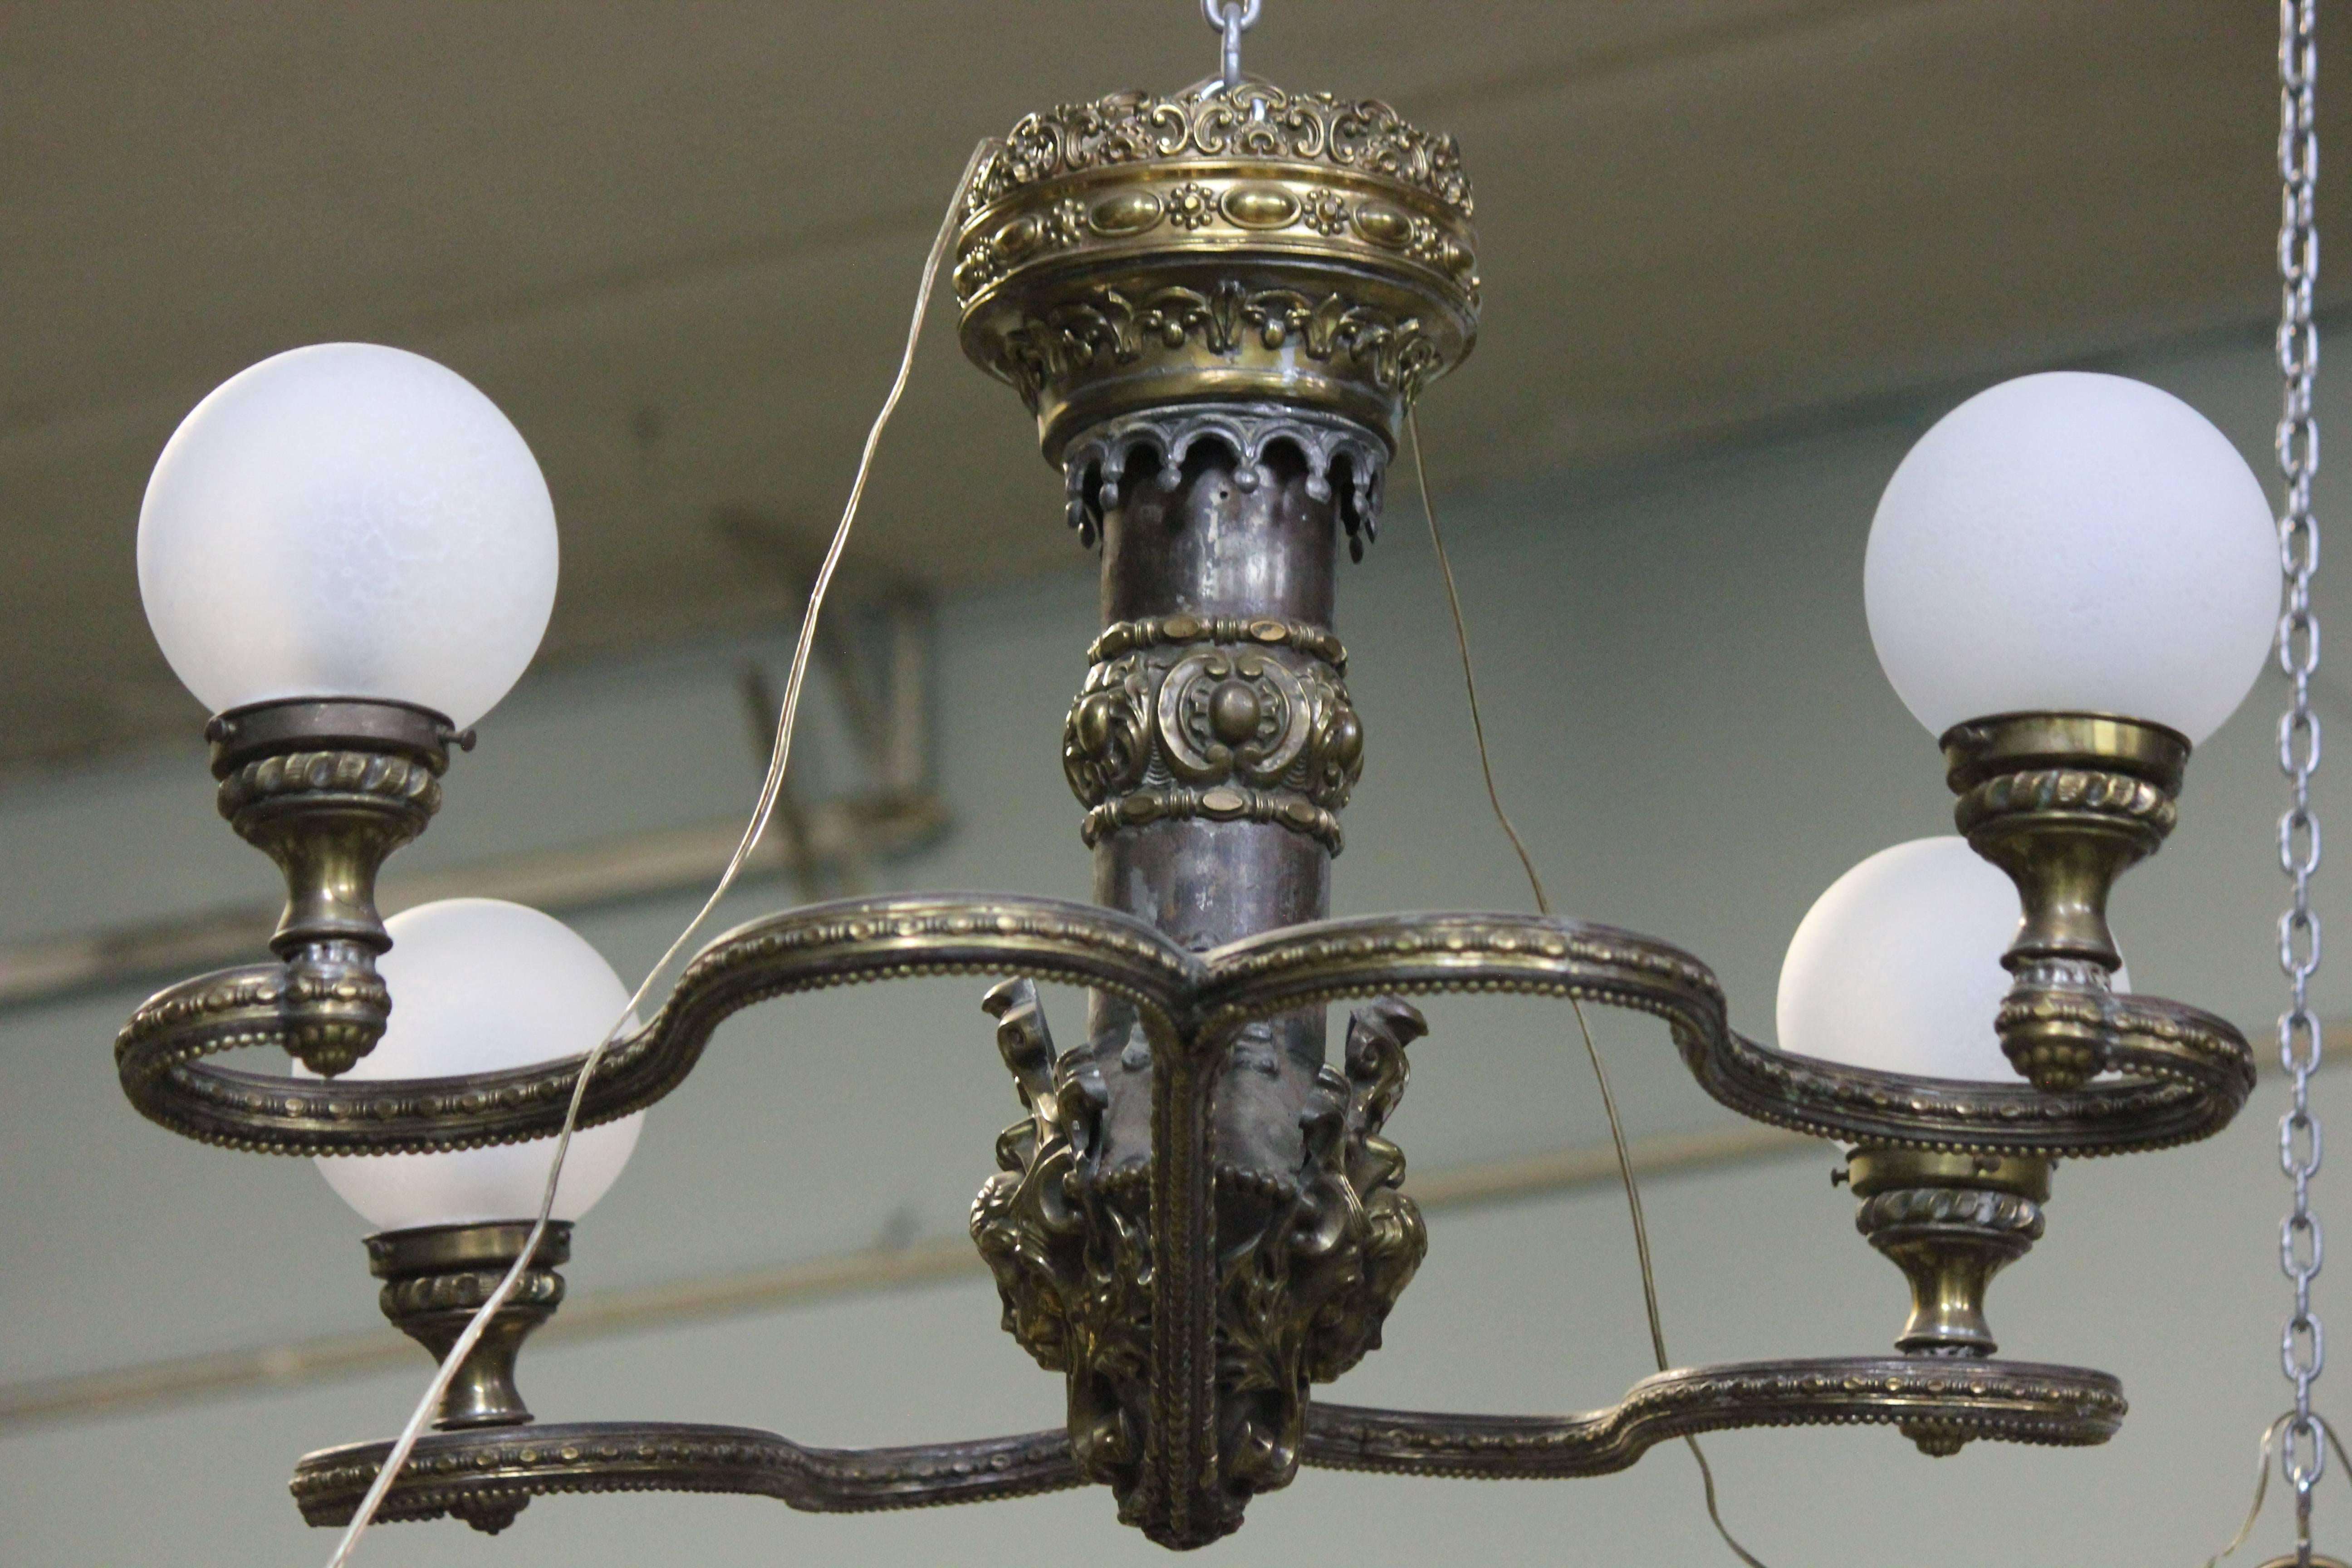 A Most Incredible, Rare, and Unique Highly Decorative Monumental Beaux Arts Belle Epoque Chandelier!!!- Four Volute Curvilinear Repousse Arms, Milk Glass Globes, Brass and Zinc Stem, Double Sided Repousse Putti and Elaborate Trim- Great Aged Patina